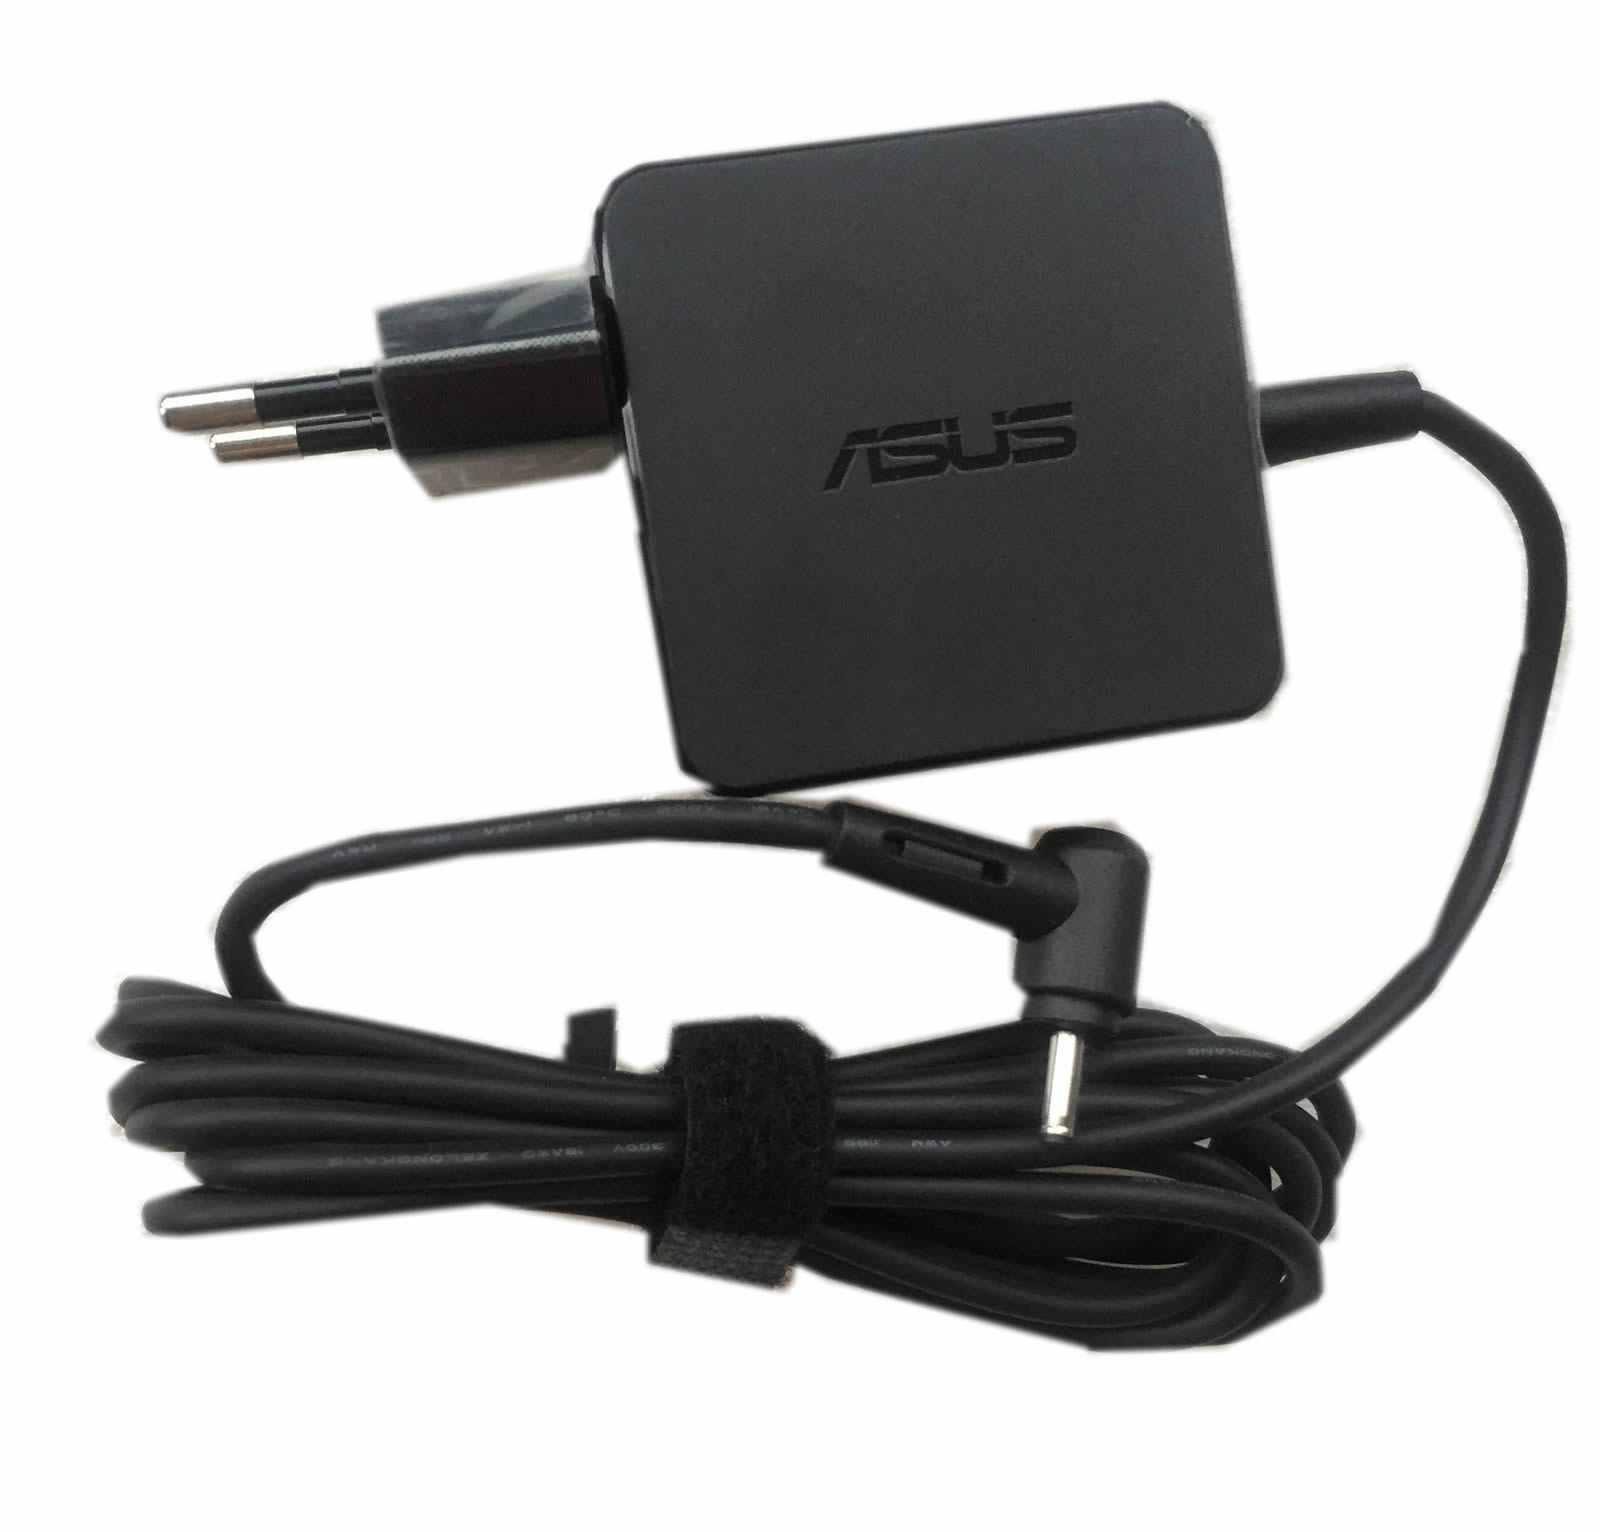 Asus AD890326,ADP-33BW A Original laptop AC Adapter 19V 1.75A 33W for Asus T3 CHI, T300 CHI, T200